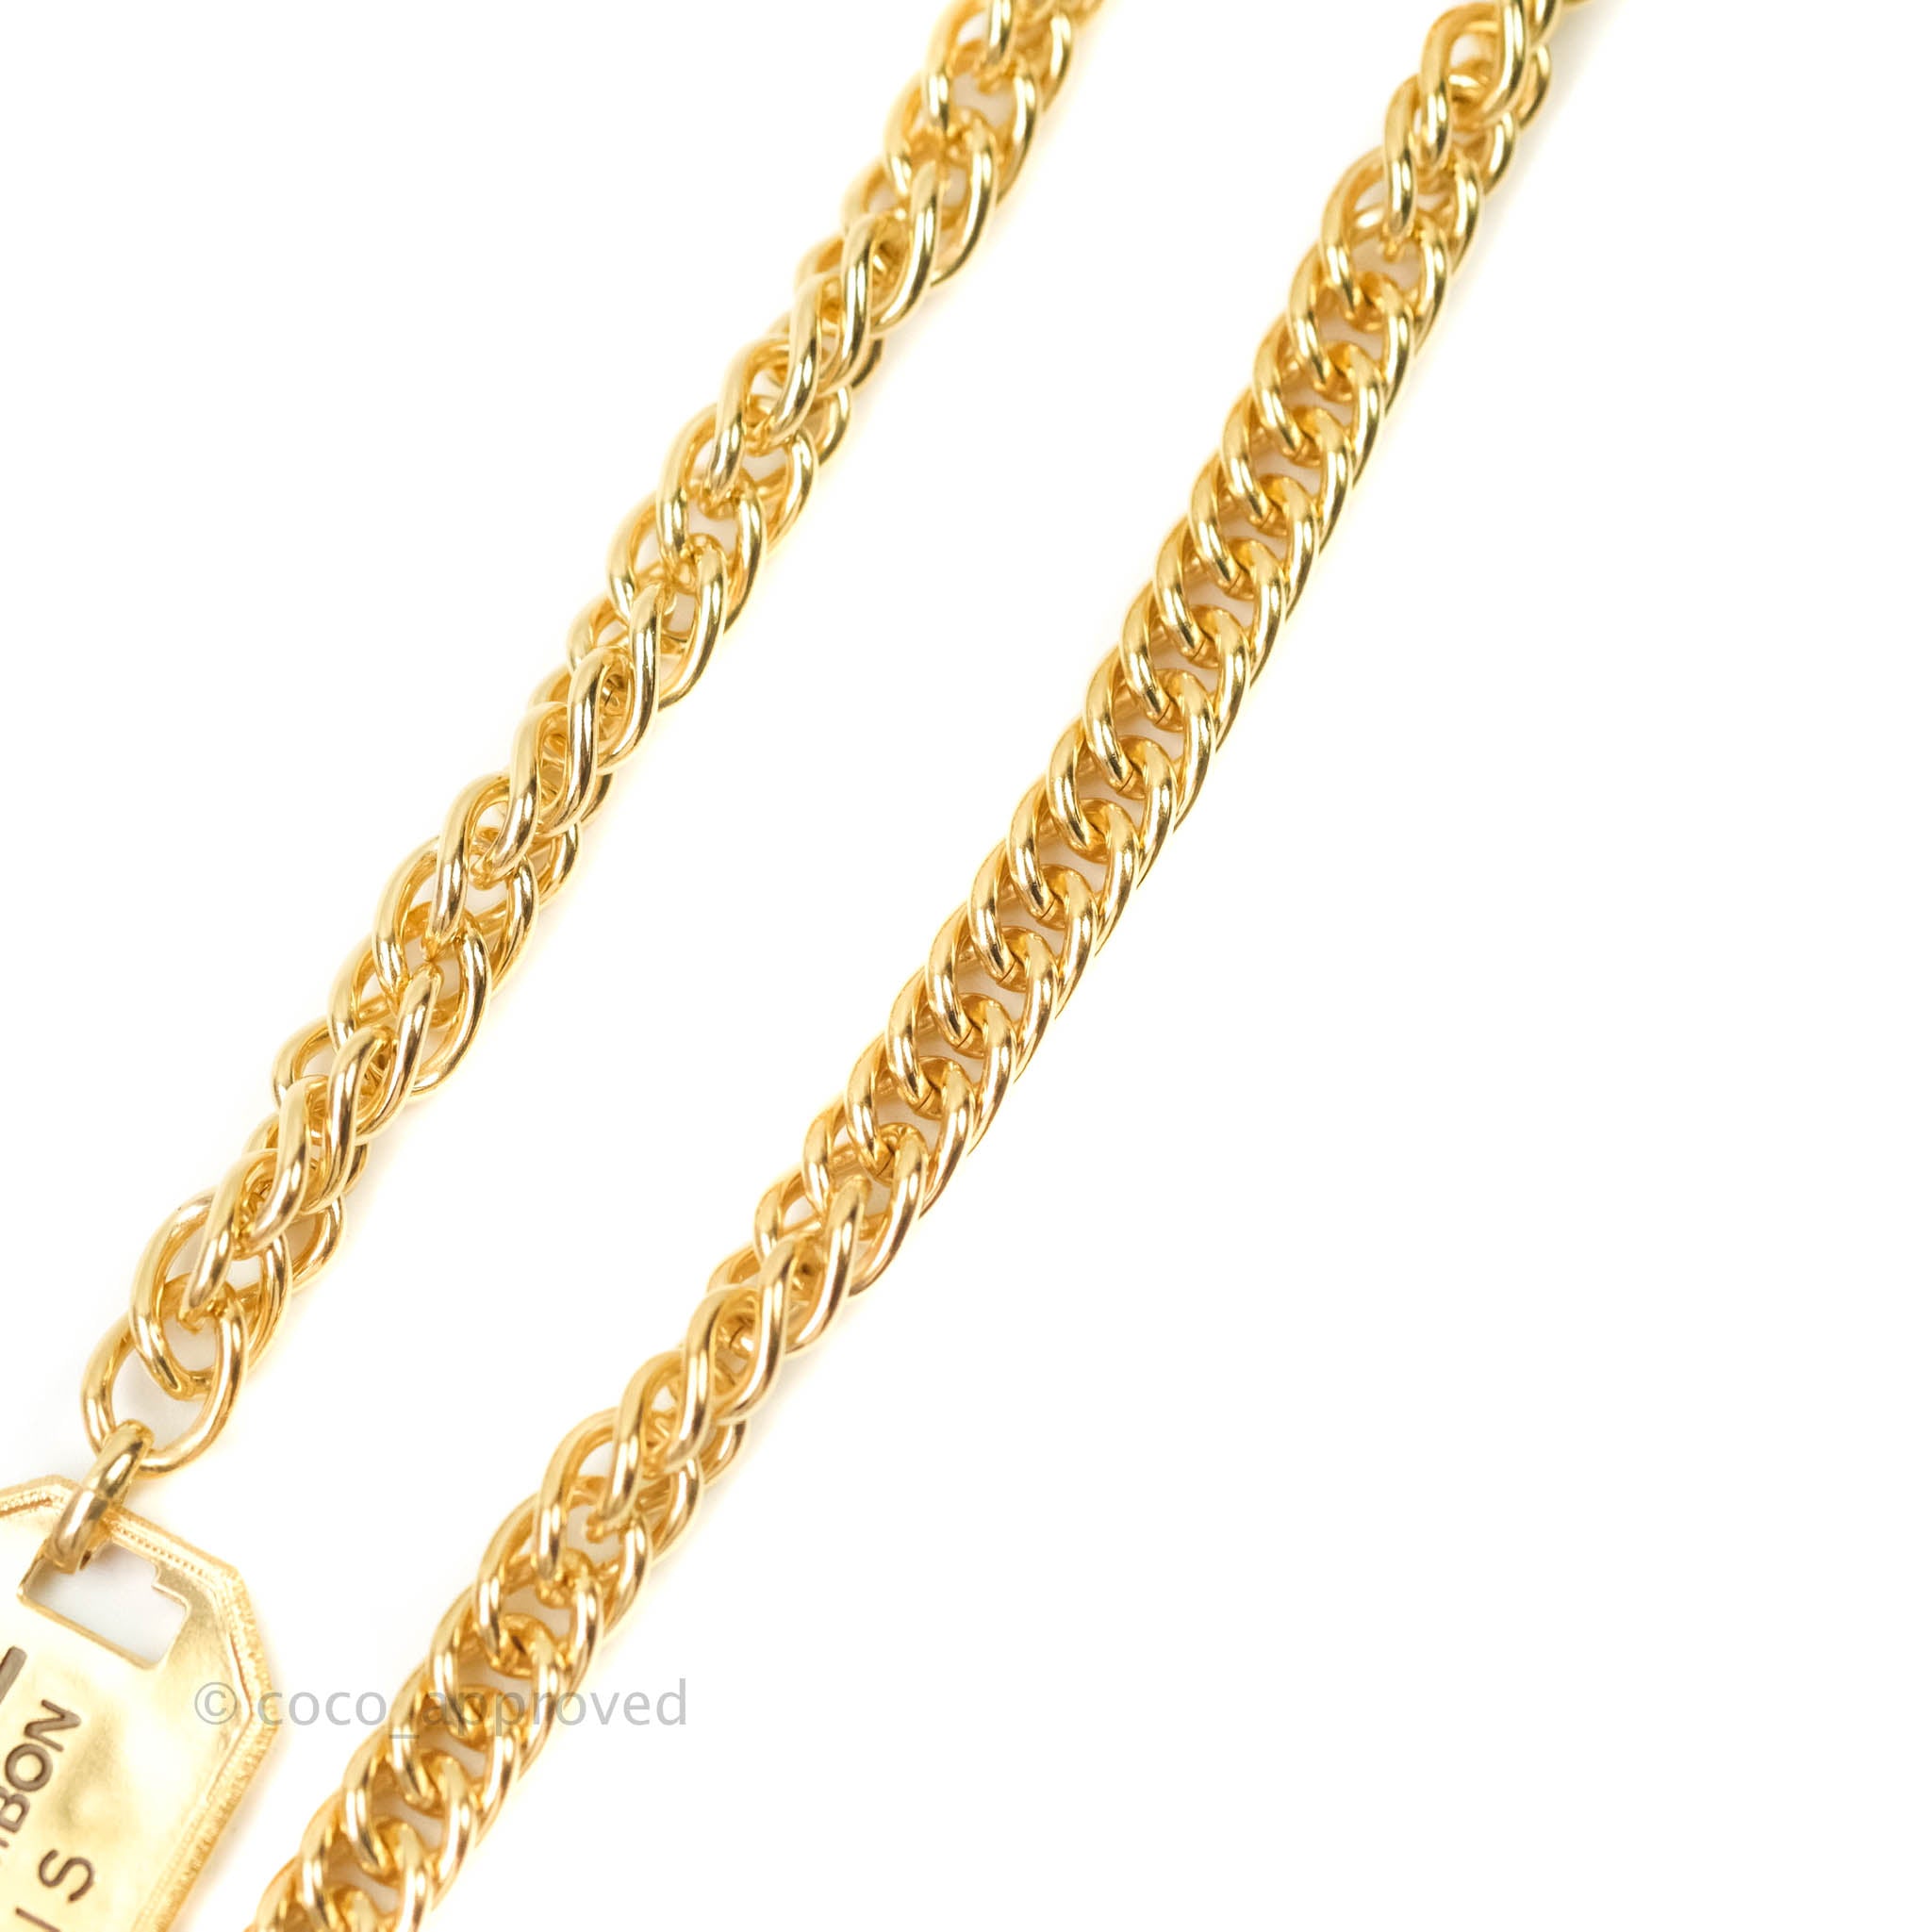 Chanel Metal Tag Charm Necklace Gold Tone – Coco Approved Studio